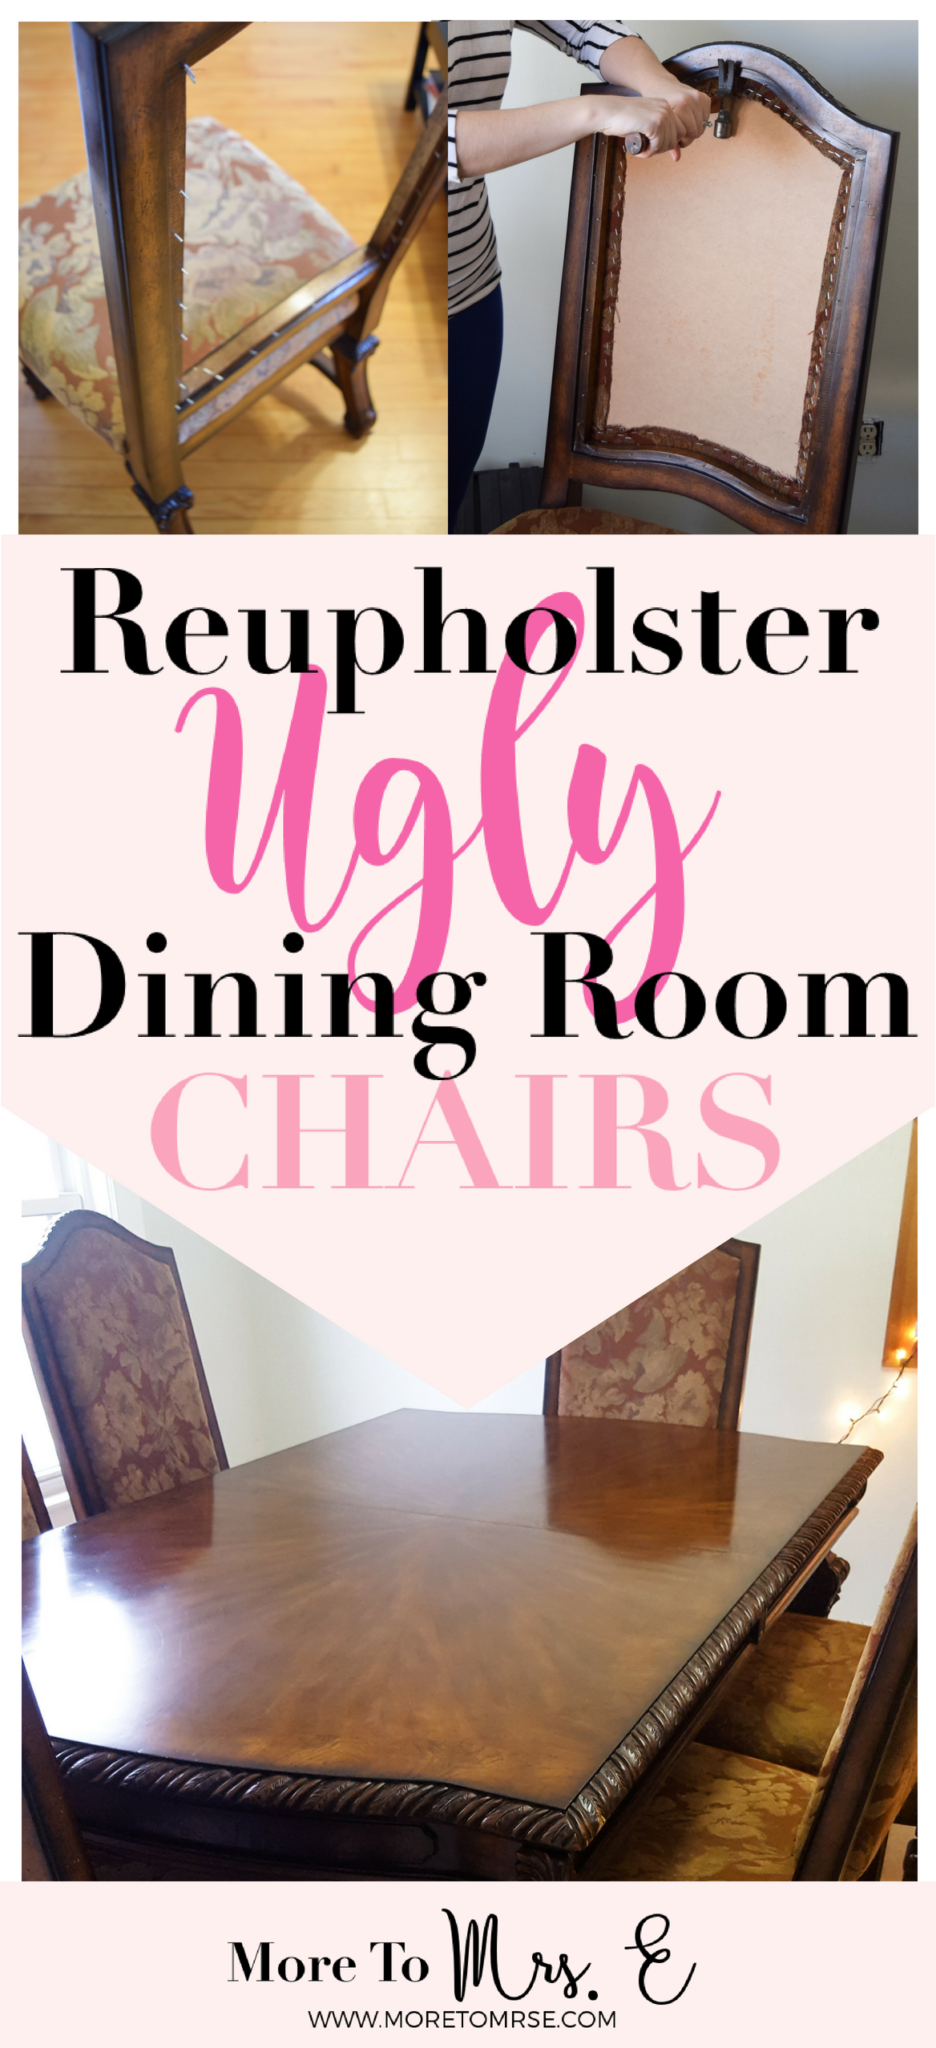 Reupholster_Dining_Room_Chairs_DIY_Project